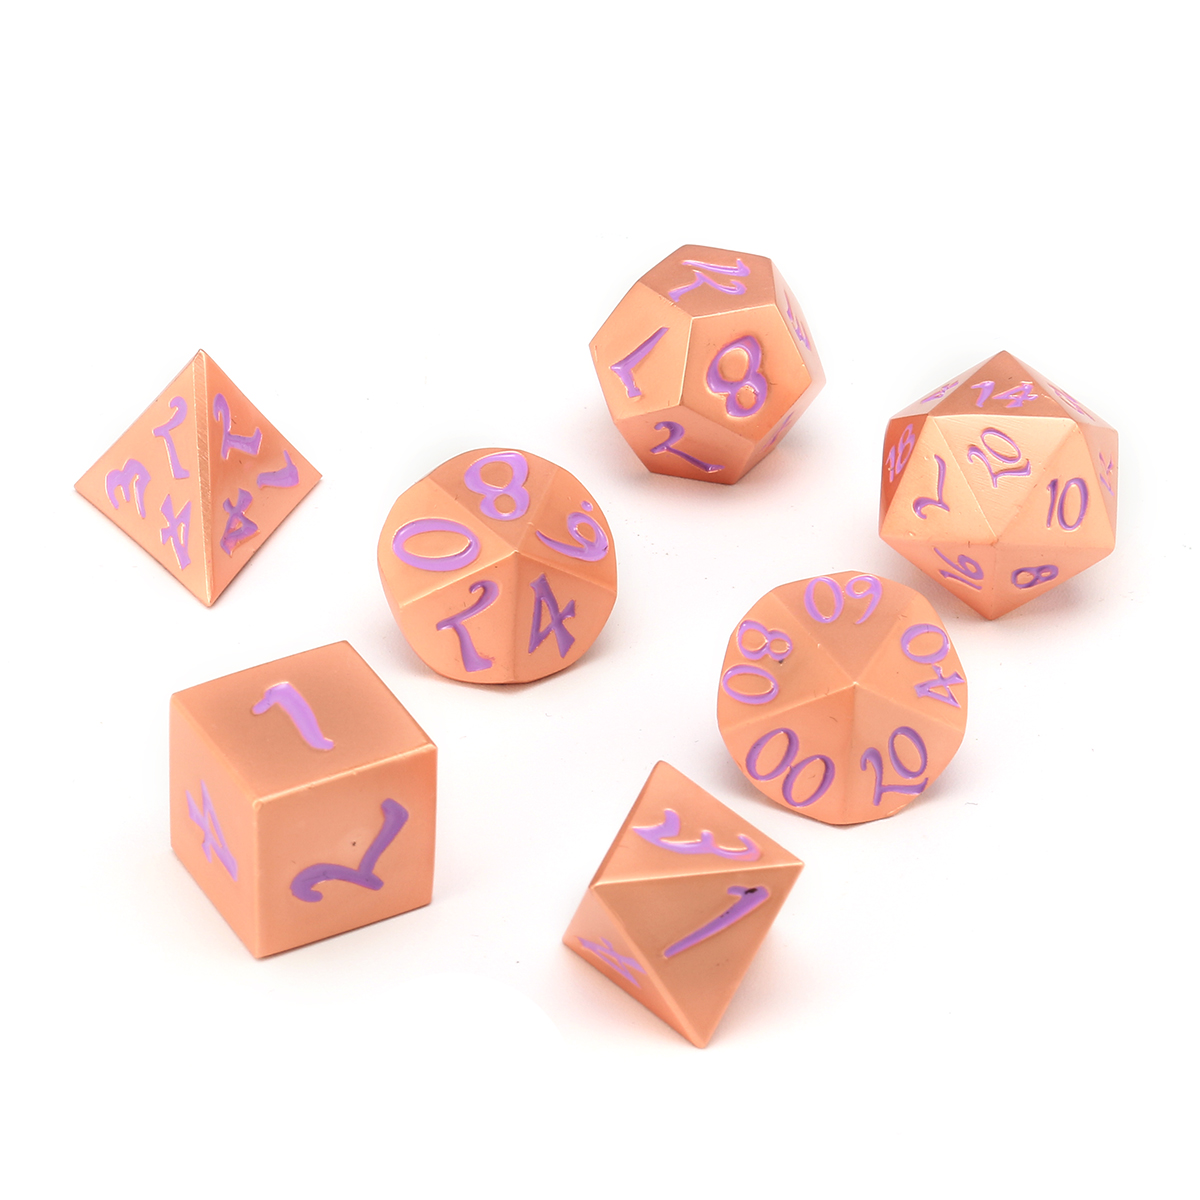 7Pcs-Antique-Metal-Polyhedral-Dice-Role-Playing-Game-Dices-Heavy-Duty-With-Bag-1320392-3